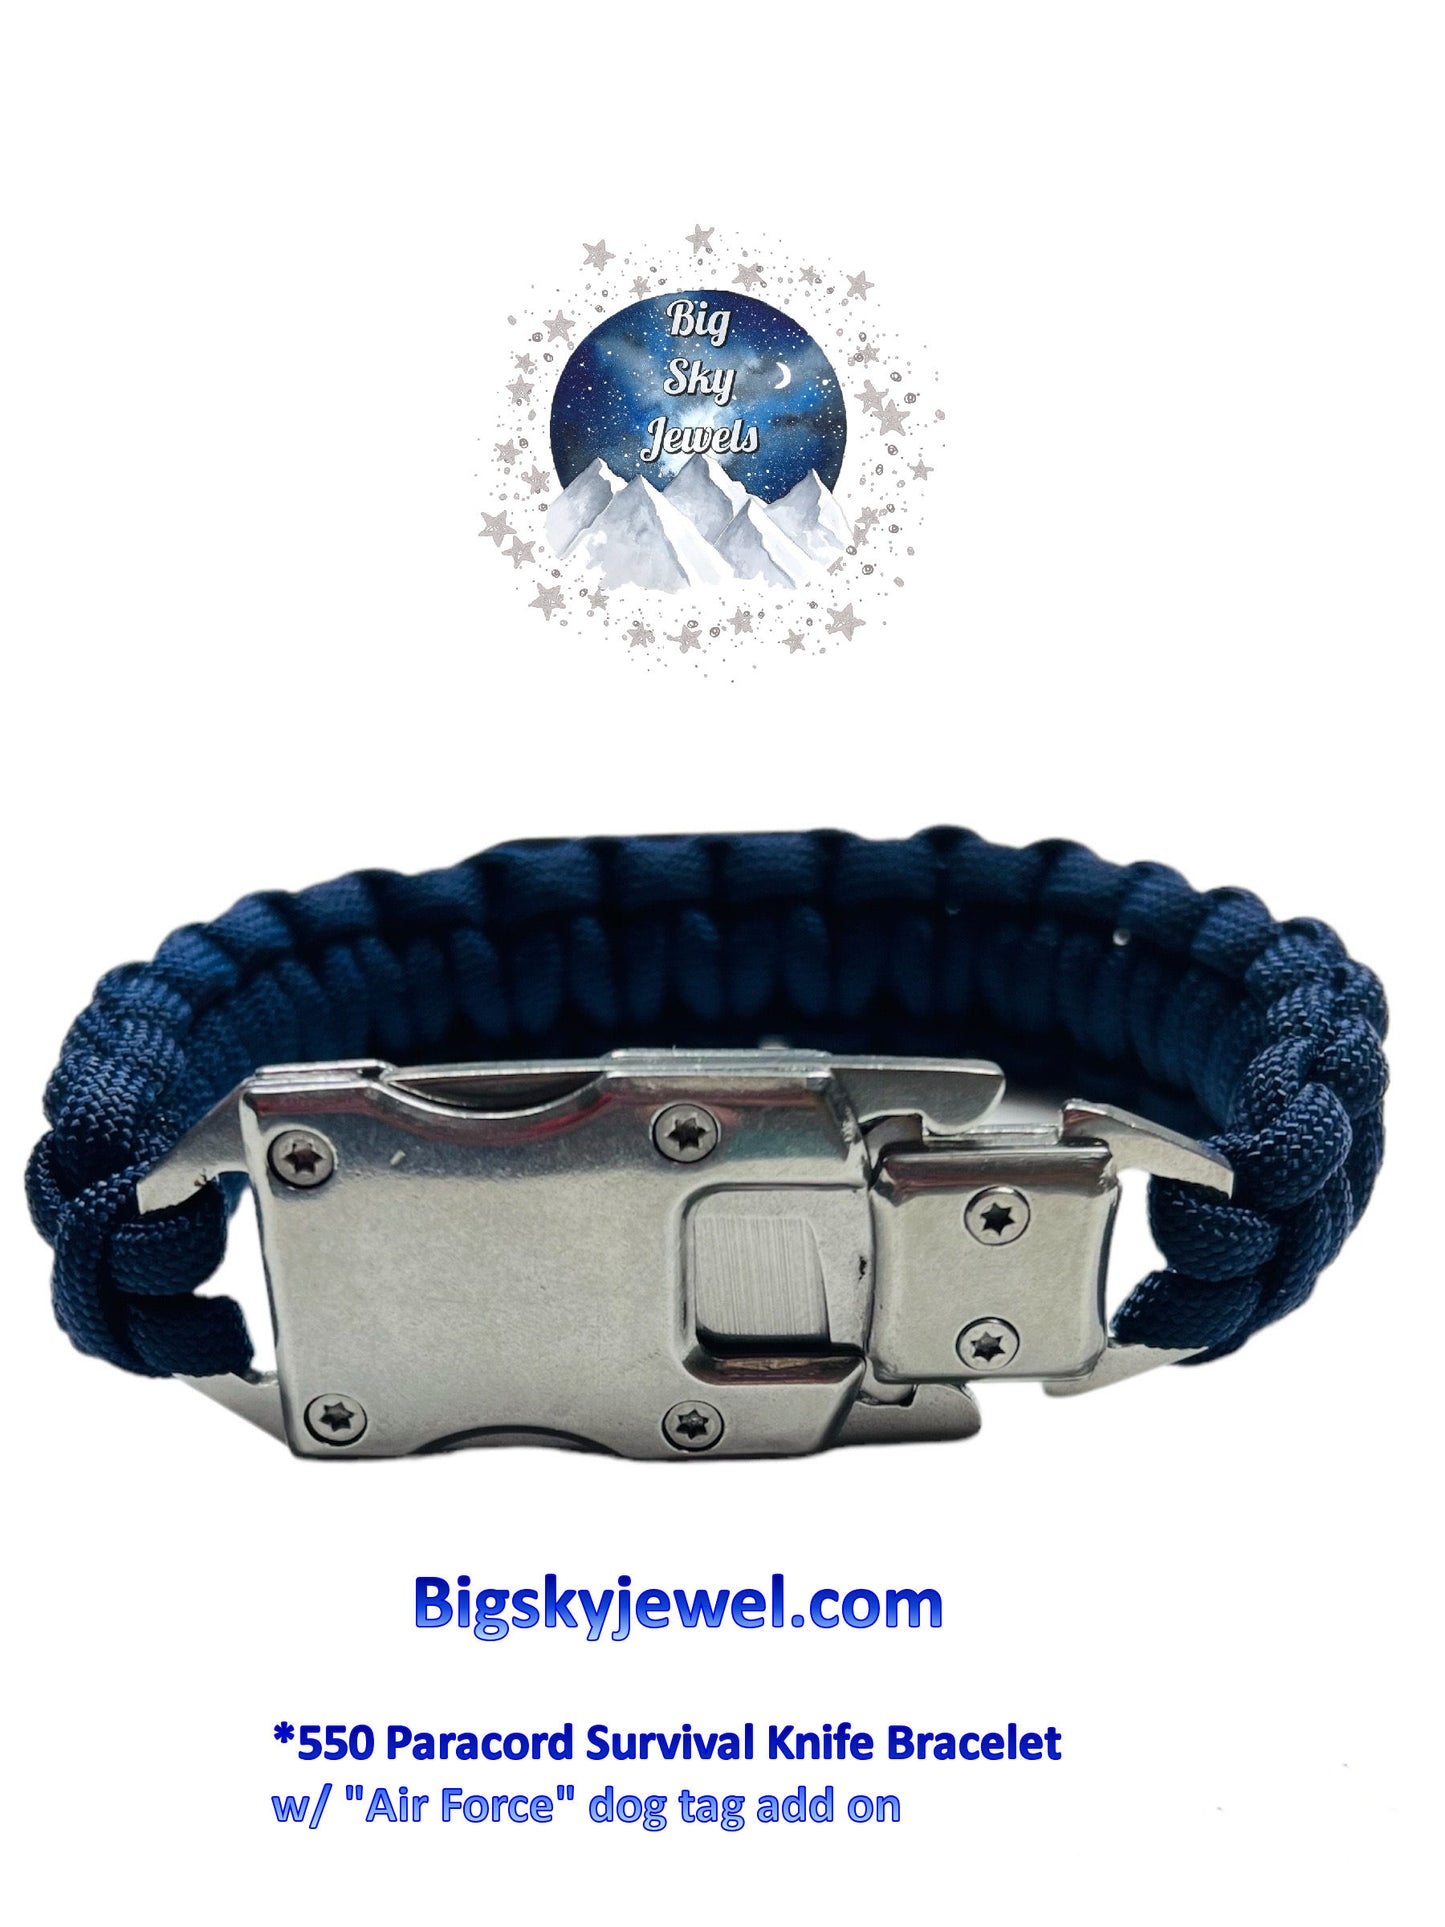 Custom Order For Size: ONE 550 Paracord Survival Bracelet w/ Knife Buckle.  Stainless Steel Silver Color Buckle. Dark Blue Color Paracord Air Force Dog Tag Ages 18+, Adults only